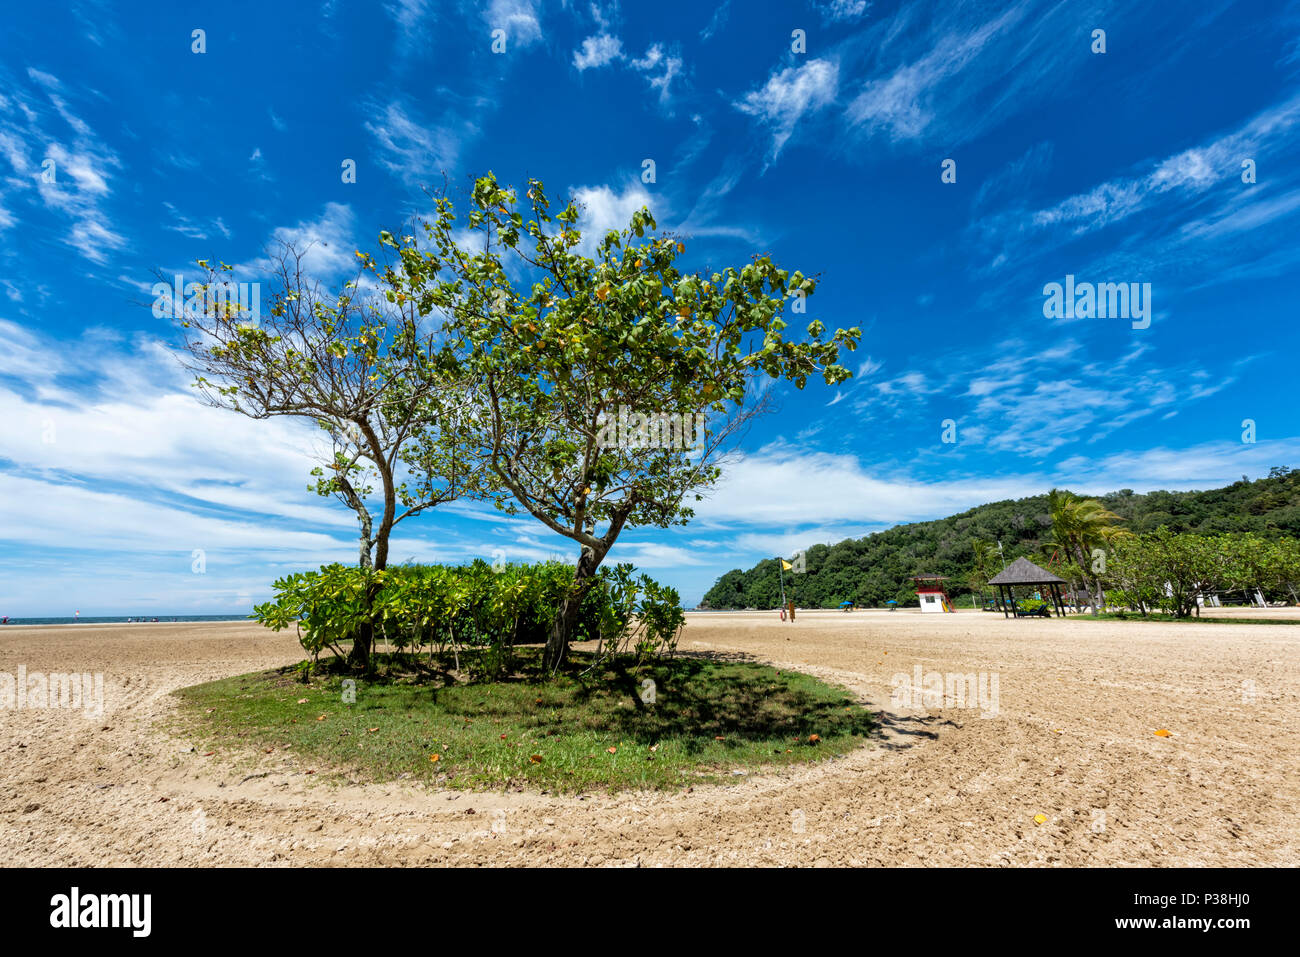 Clump of trees and a patch of grass on the beach at Kota Kinabalu, Borneo, Malaysia Stock Photo